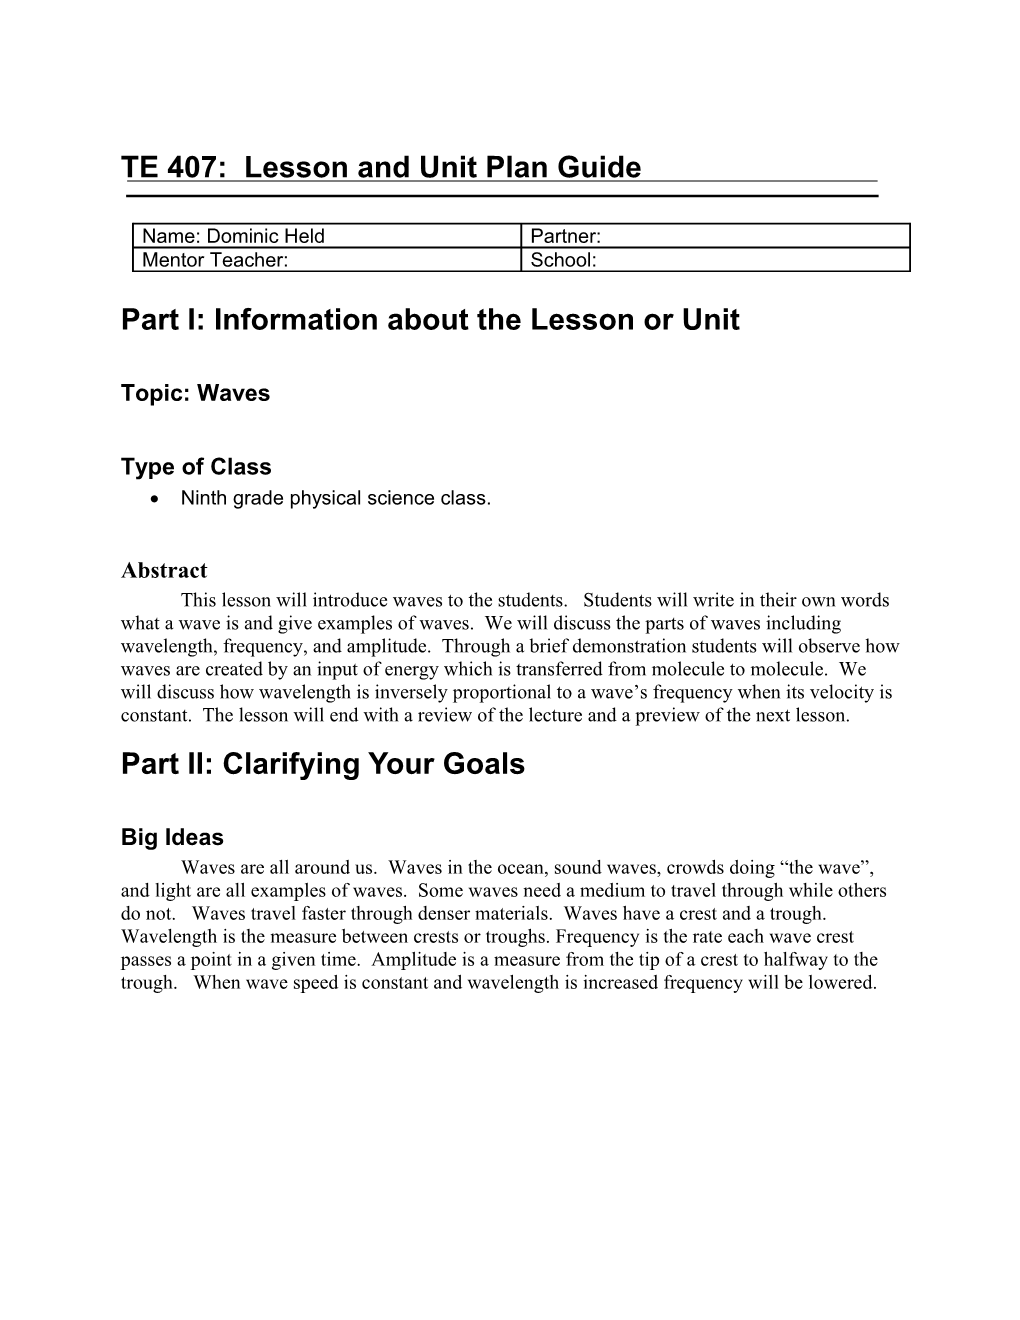 TE 401: Lesson and Unit Plan Template